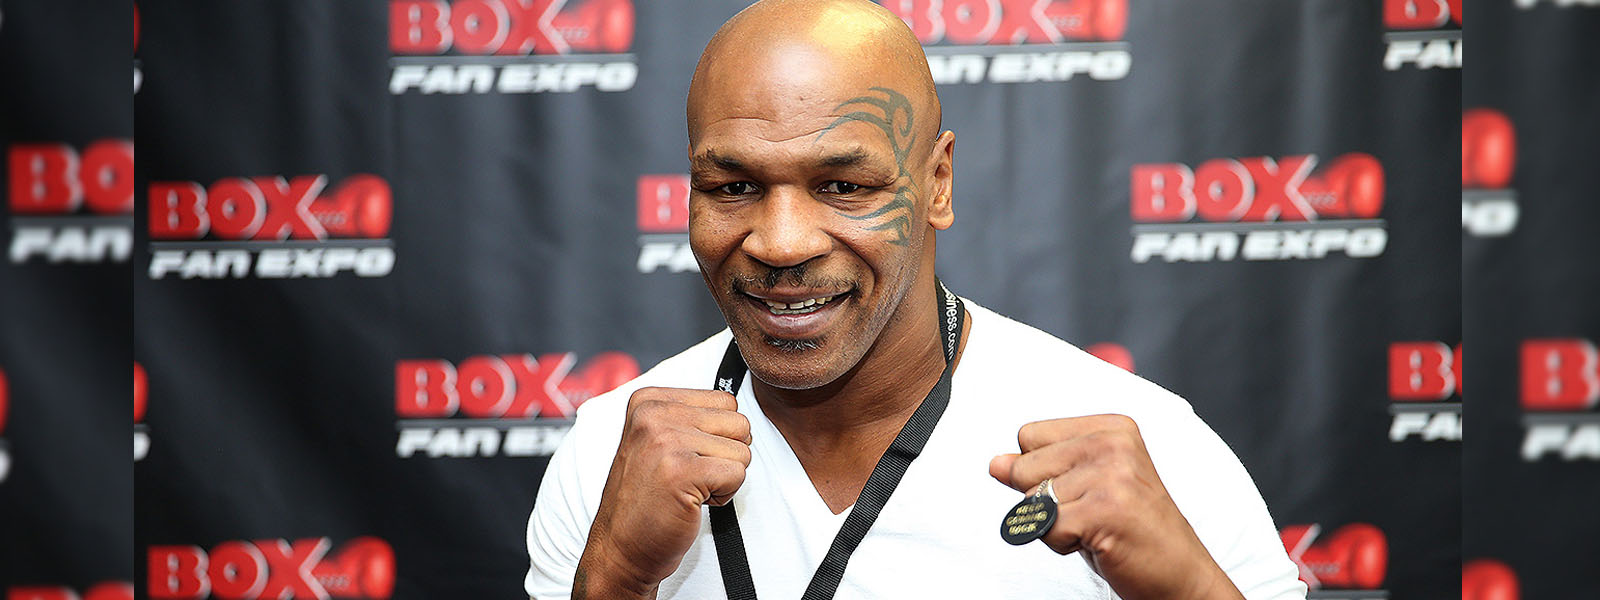 Tyson laments lack of personalities in the game